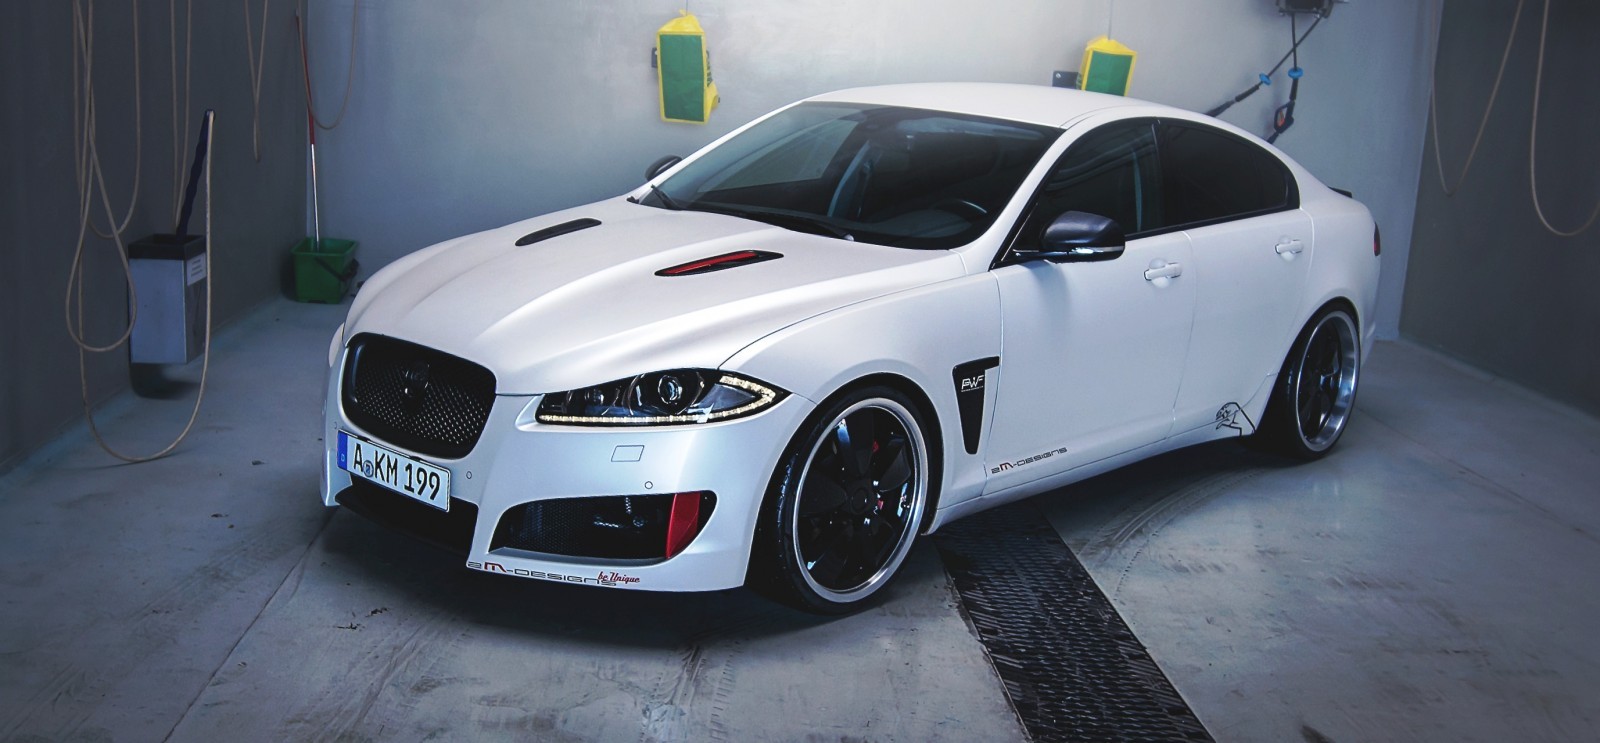 JAGUAR XF by 2M Designs Shows How To Personalize a Jag With Class